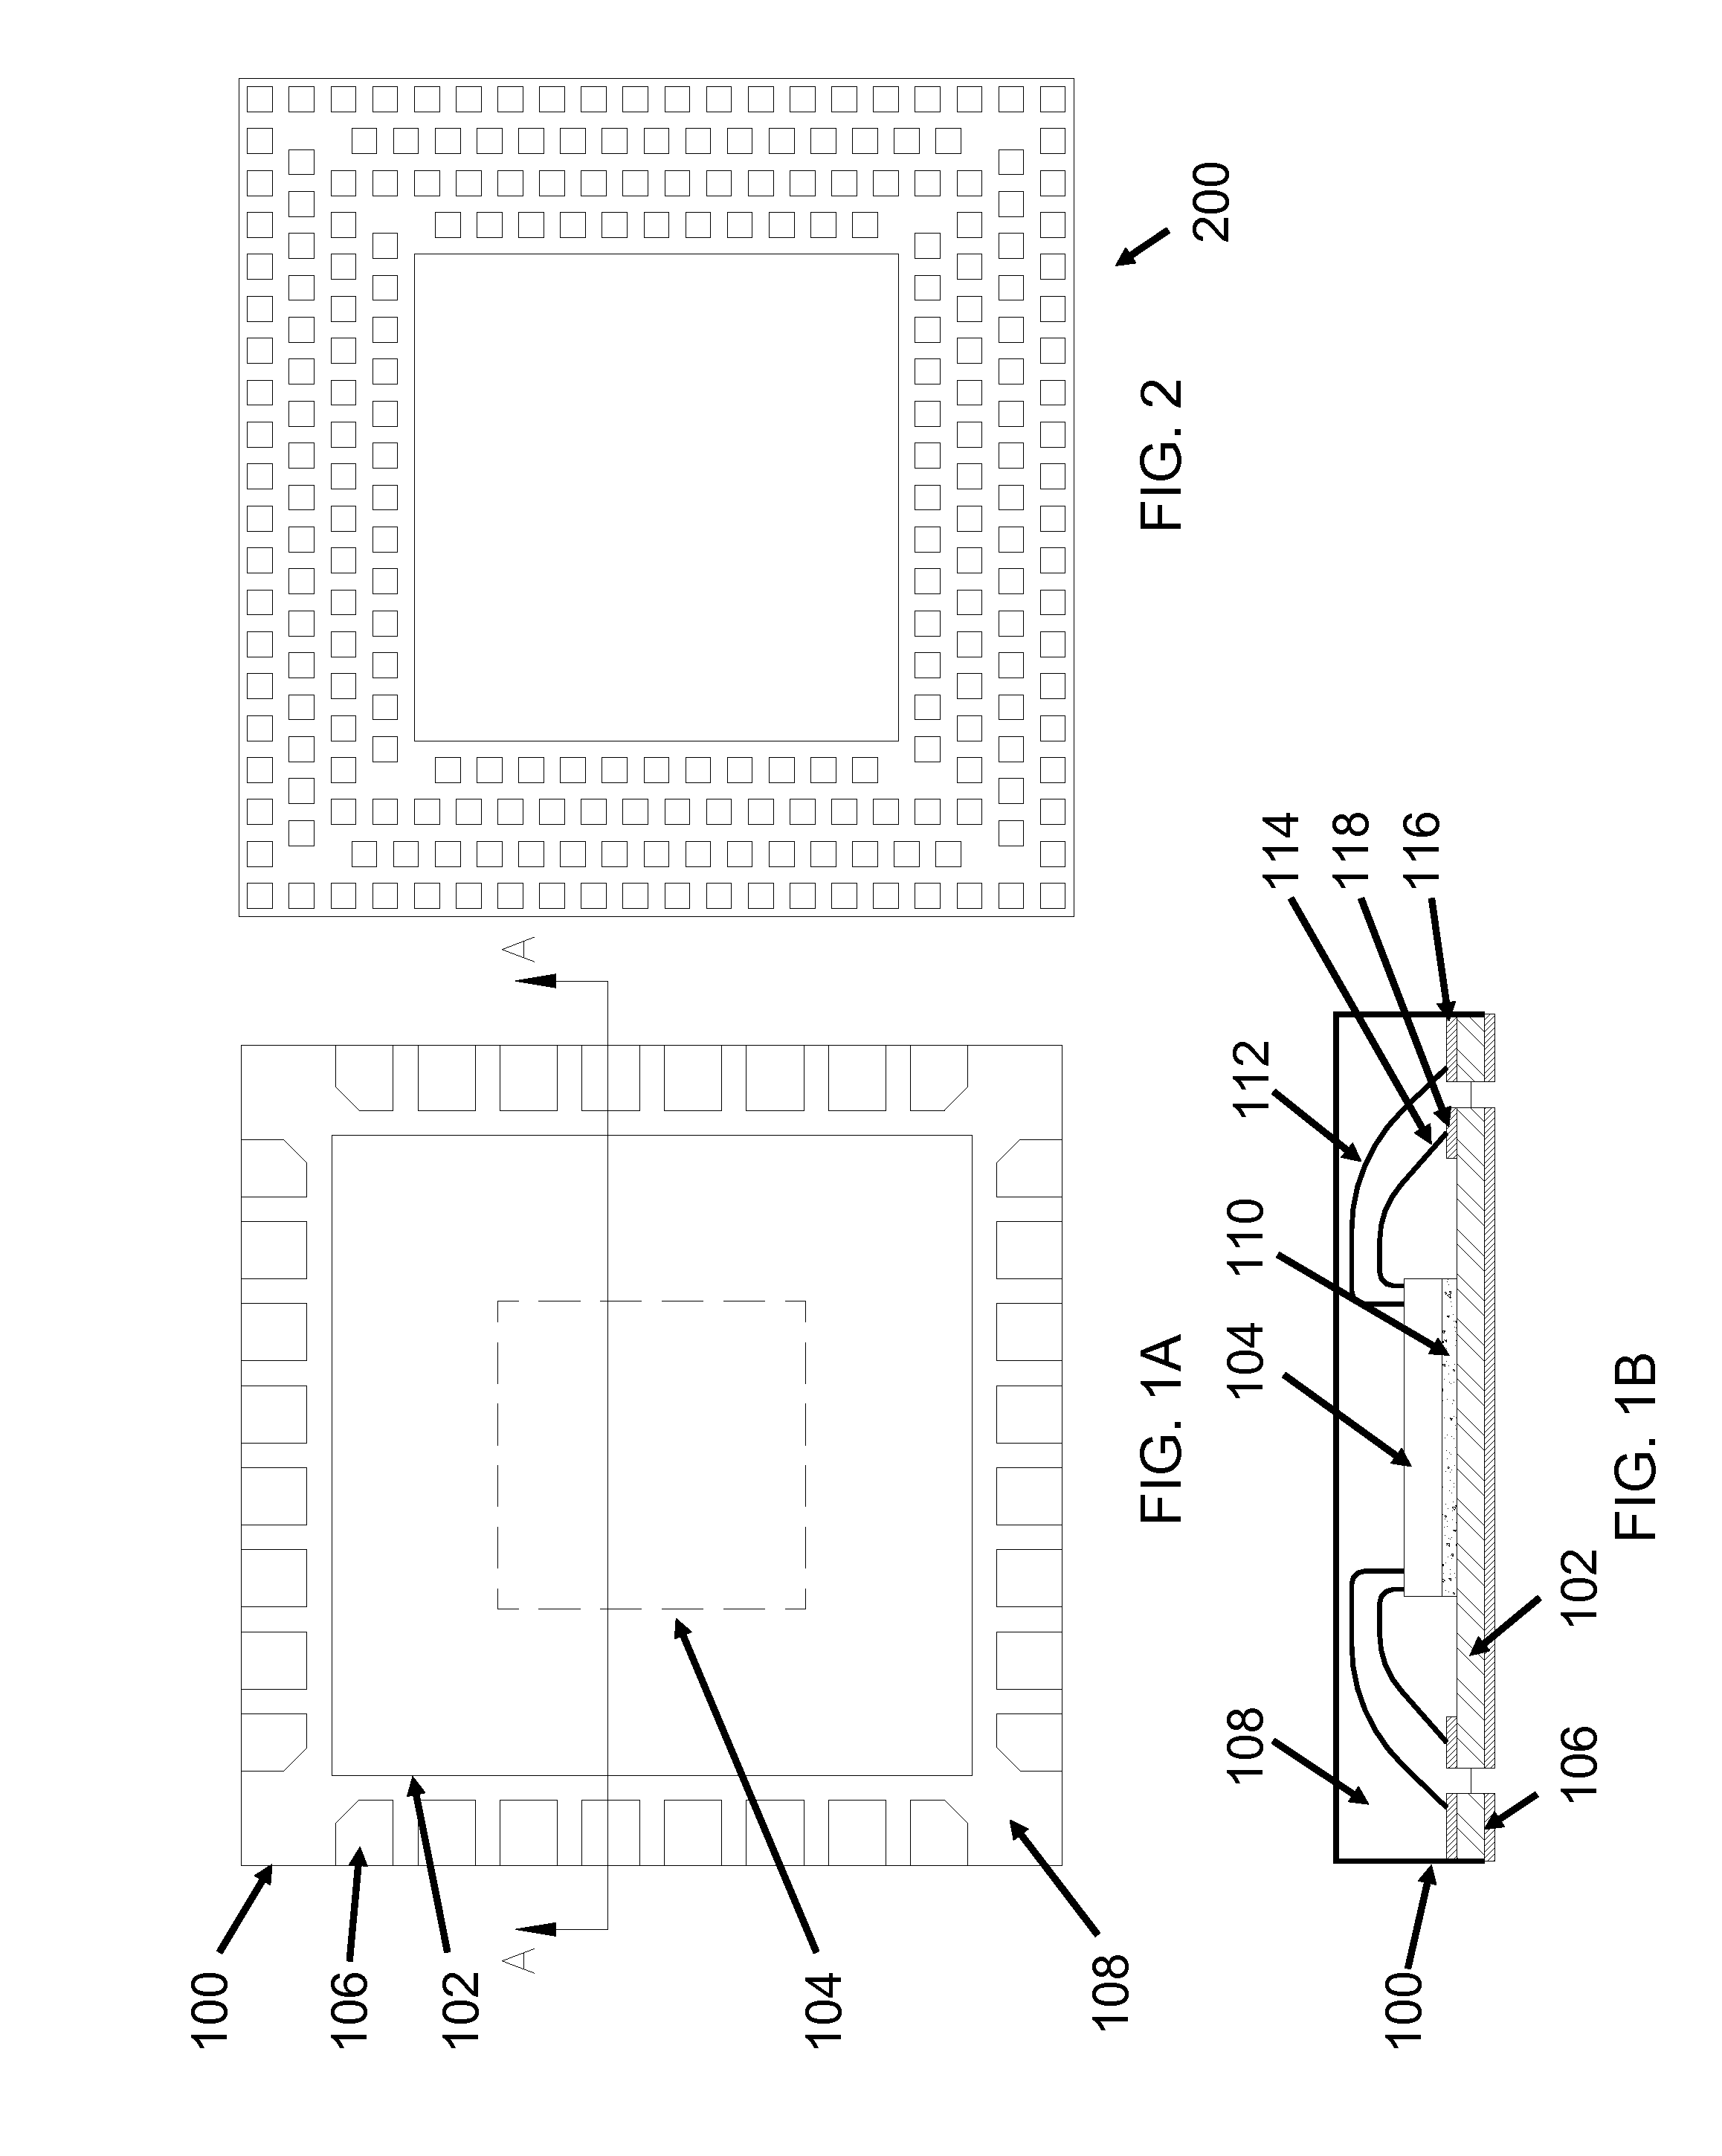 Leadless integrated circuit package having high density contacts